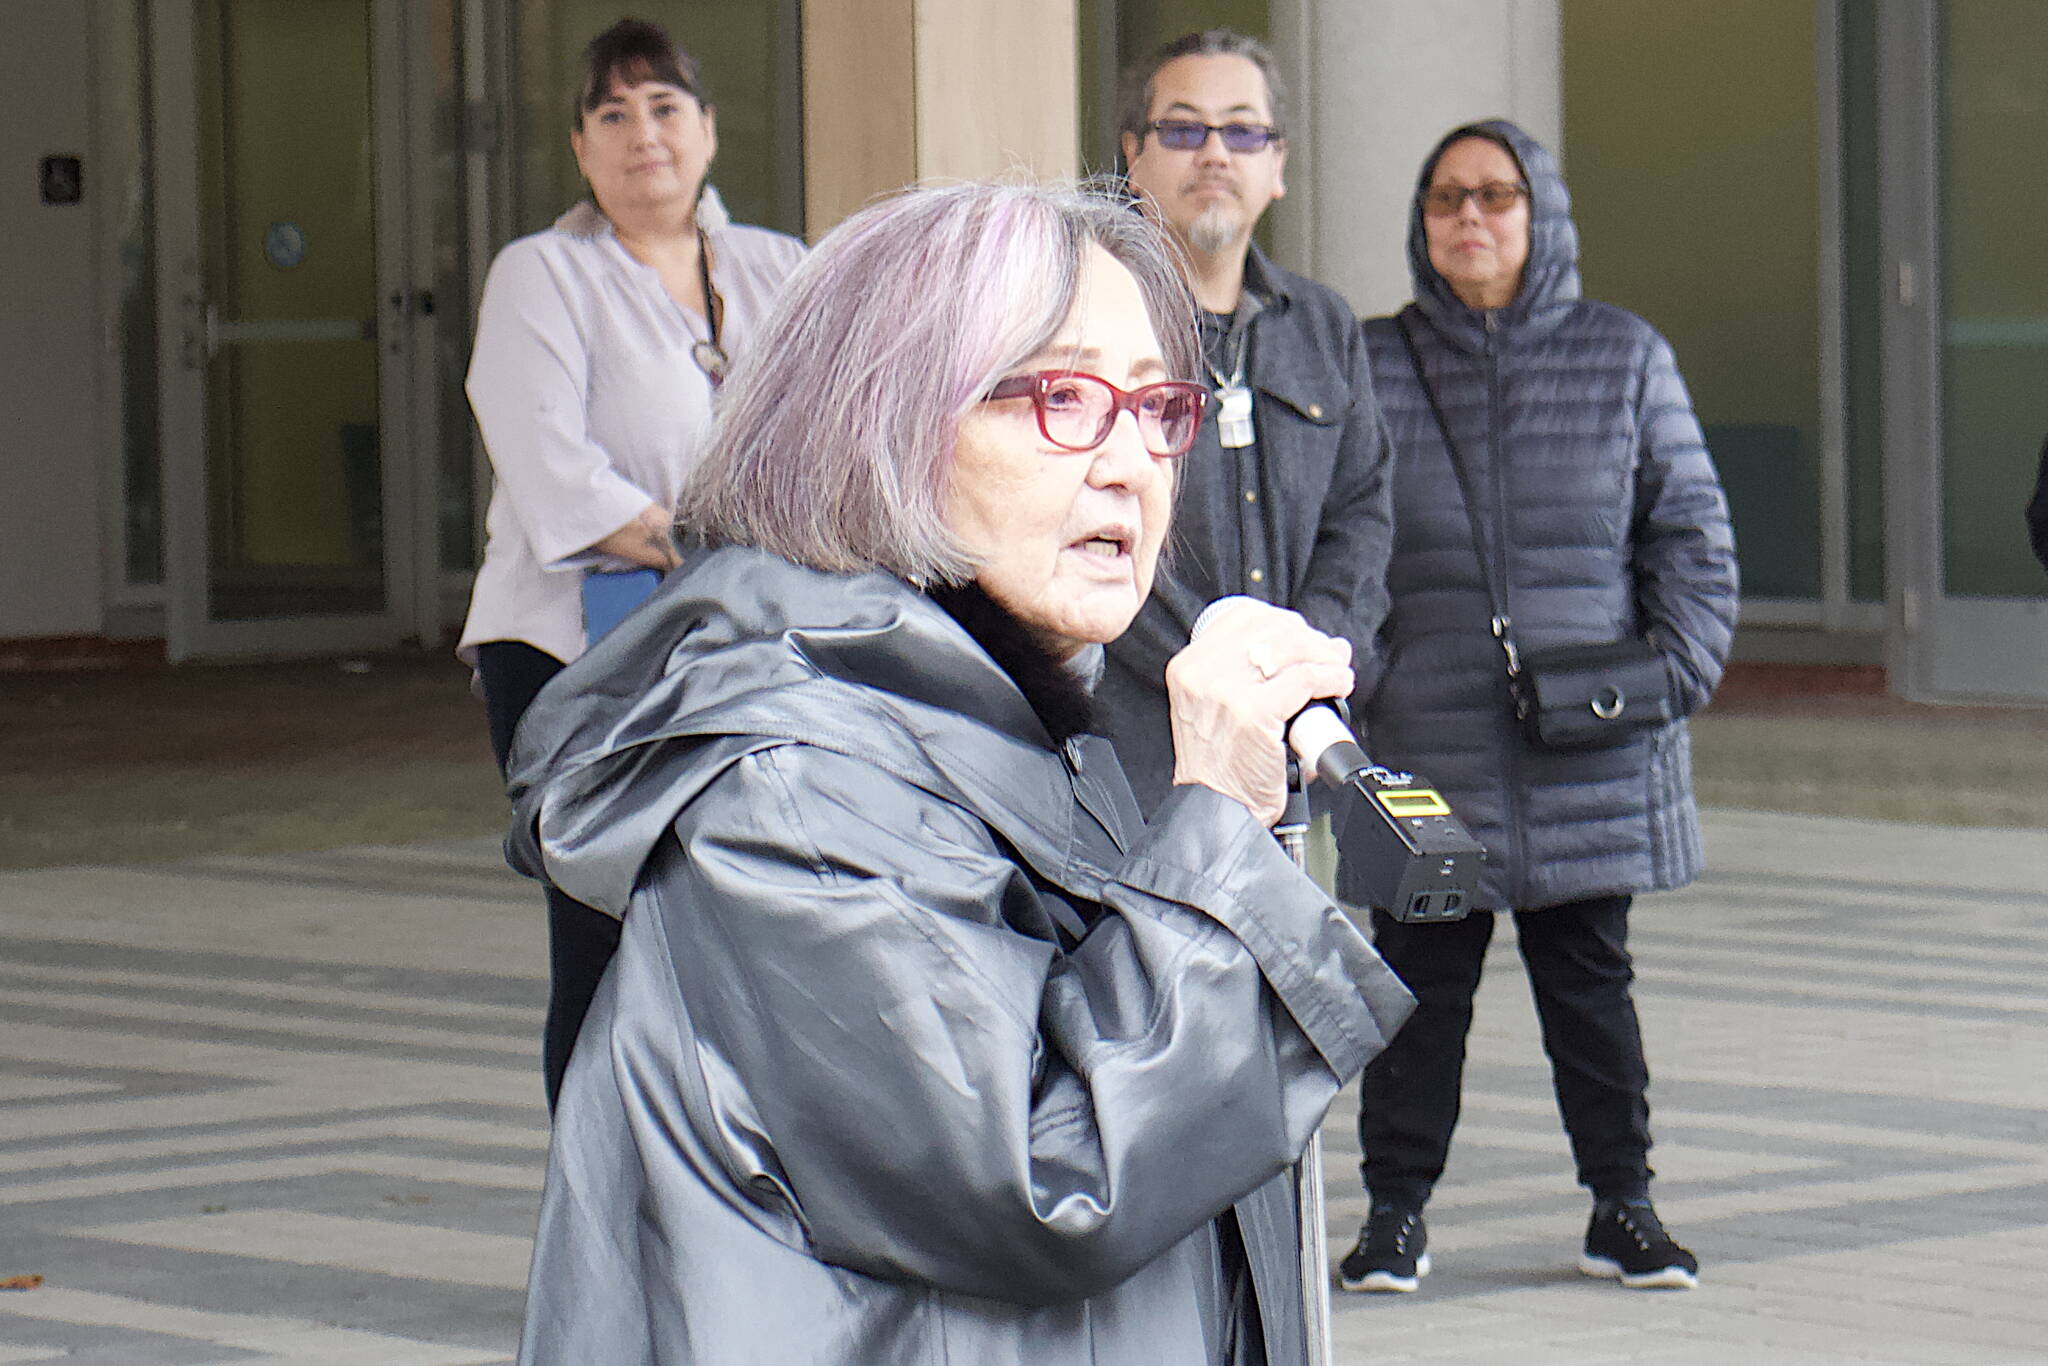 Sealaska Heritage Institute President Rosita Worl, who publicly expressed the desire to change a portion of Seward Street to Heritage Way, speaks to a crowd Wednesday during a ceremony at Sealaska Plaza celebrating the change. (Mark Sabbatini / Juneau Empire)